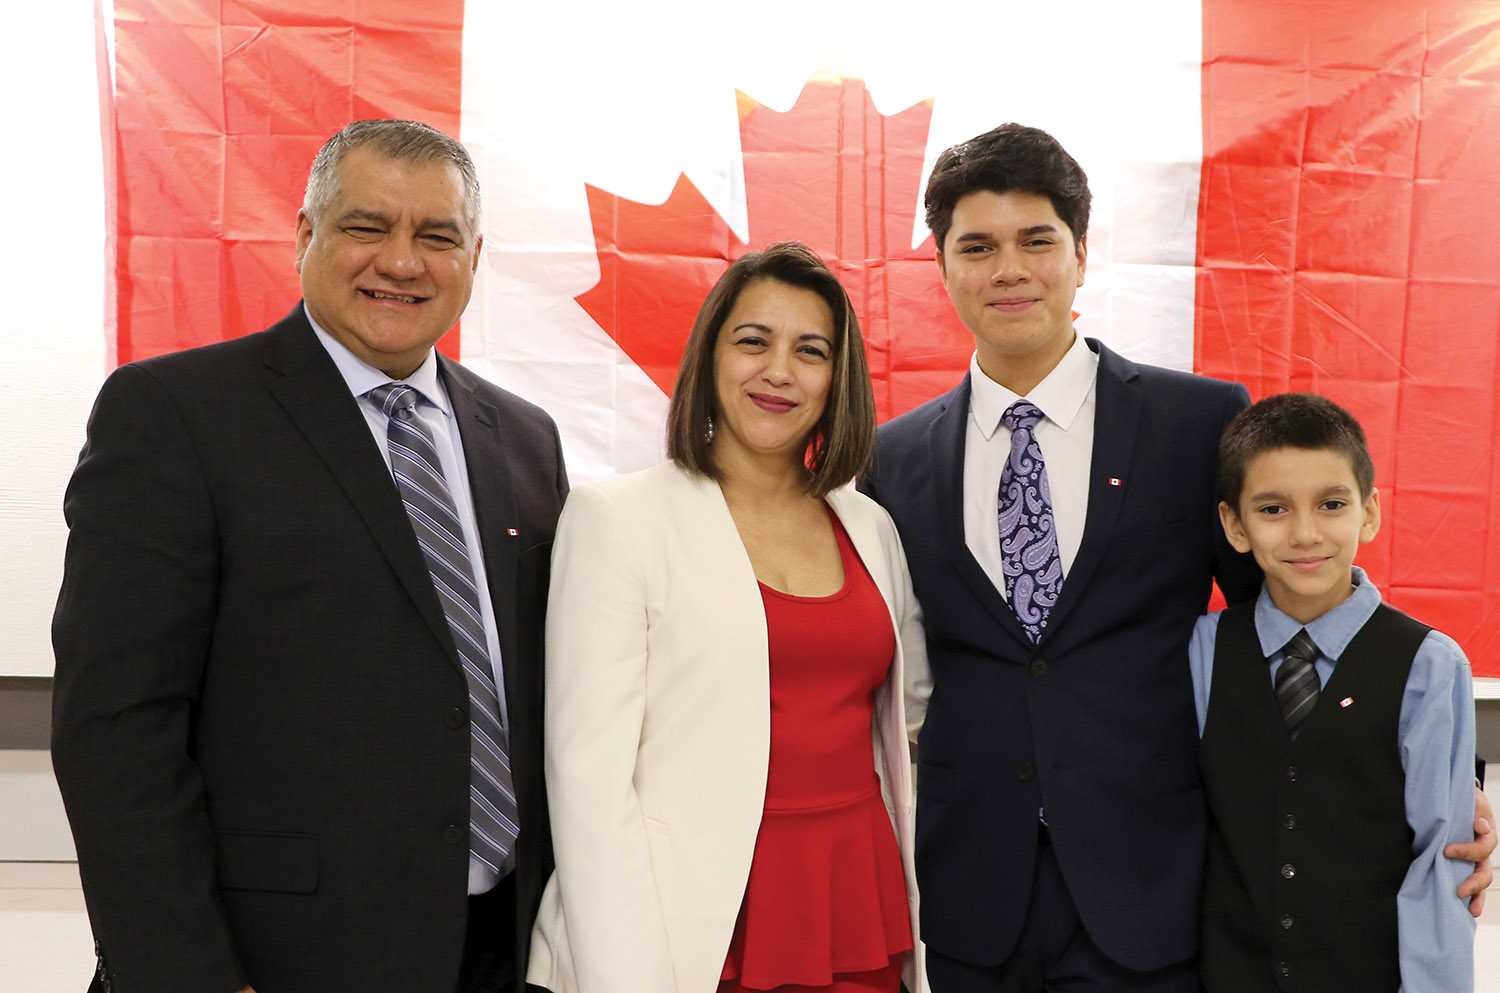 <b>Santos family proud to be Canadian citizens</b> On Feb. 1, the Santos-Cardoza family, Victor and Lesi and their two sons Victor Jr. and Edward, celebrated being Canadian citizens with the community at the Moosomin Legion. 